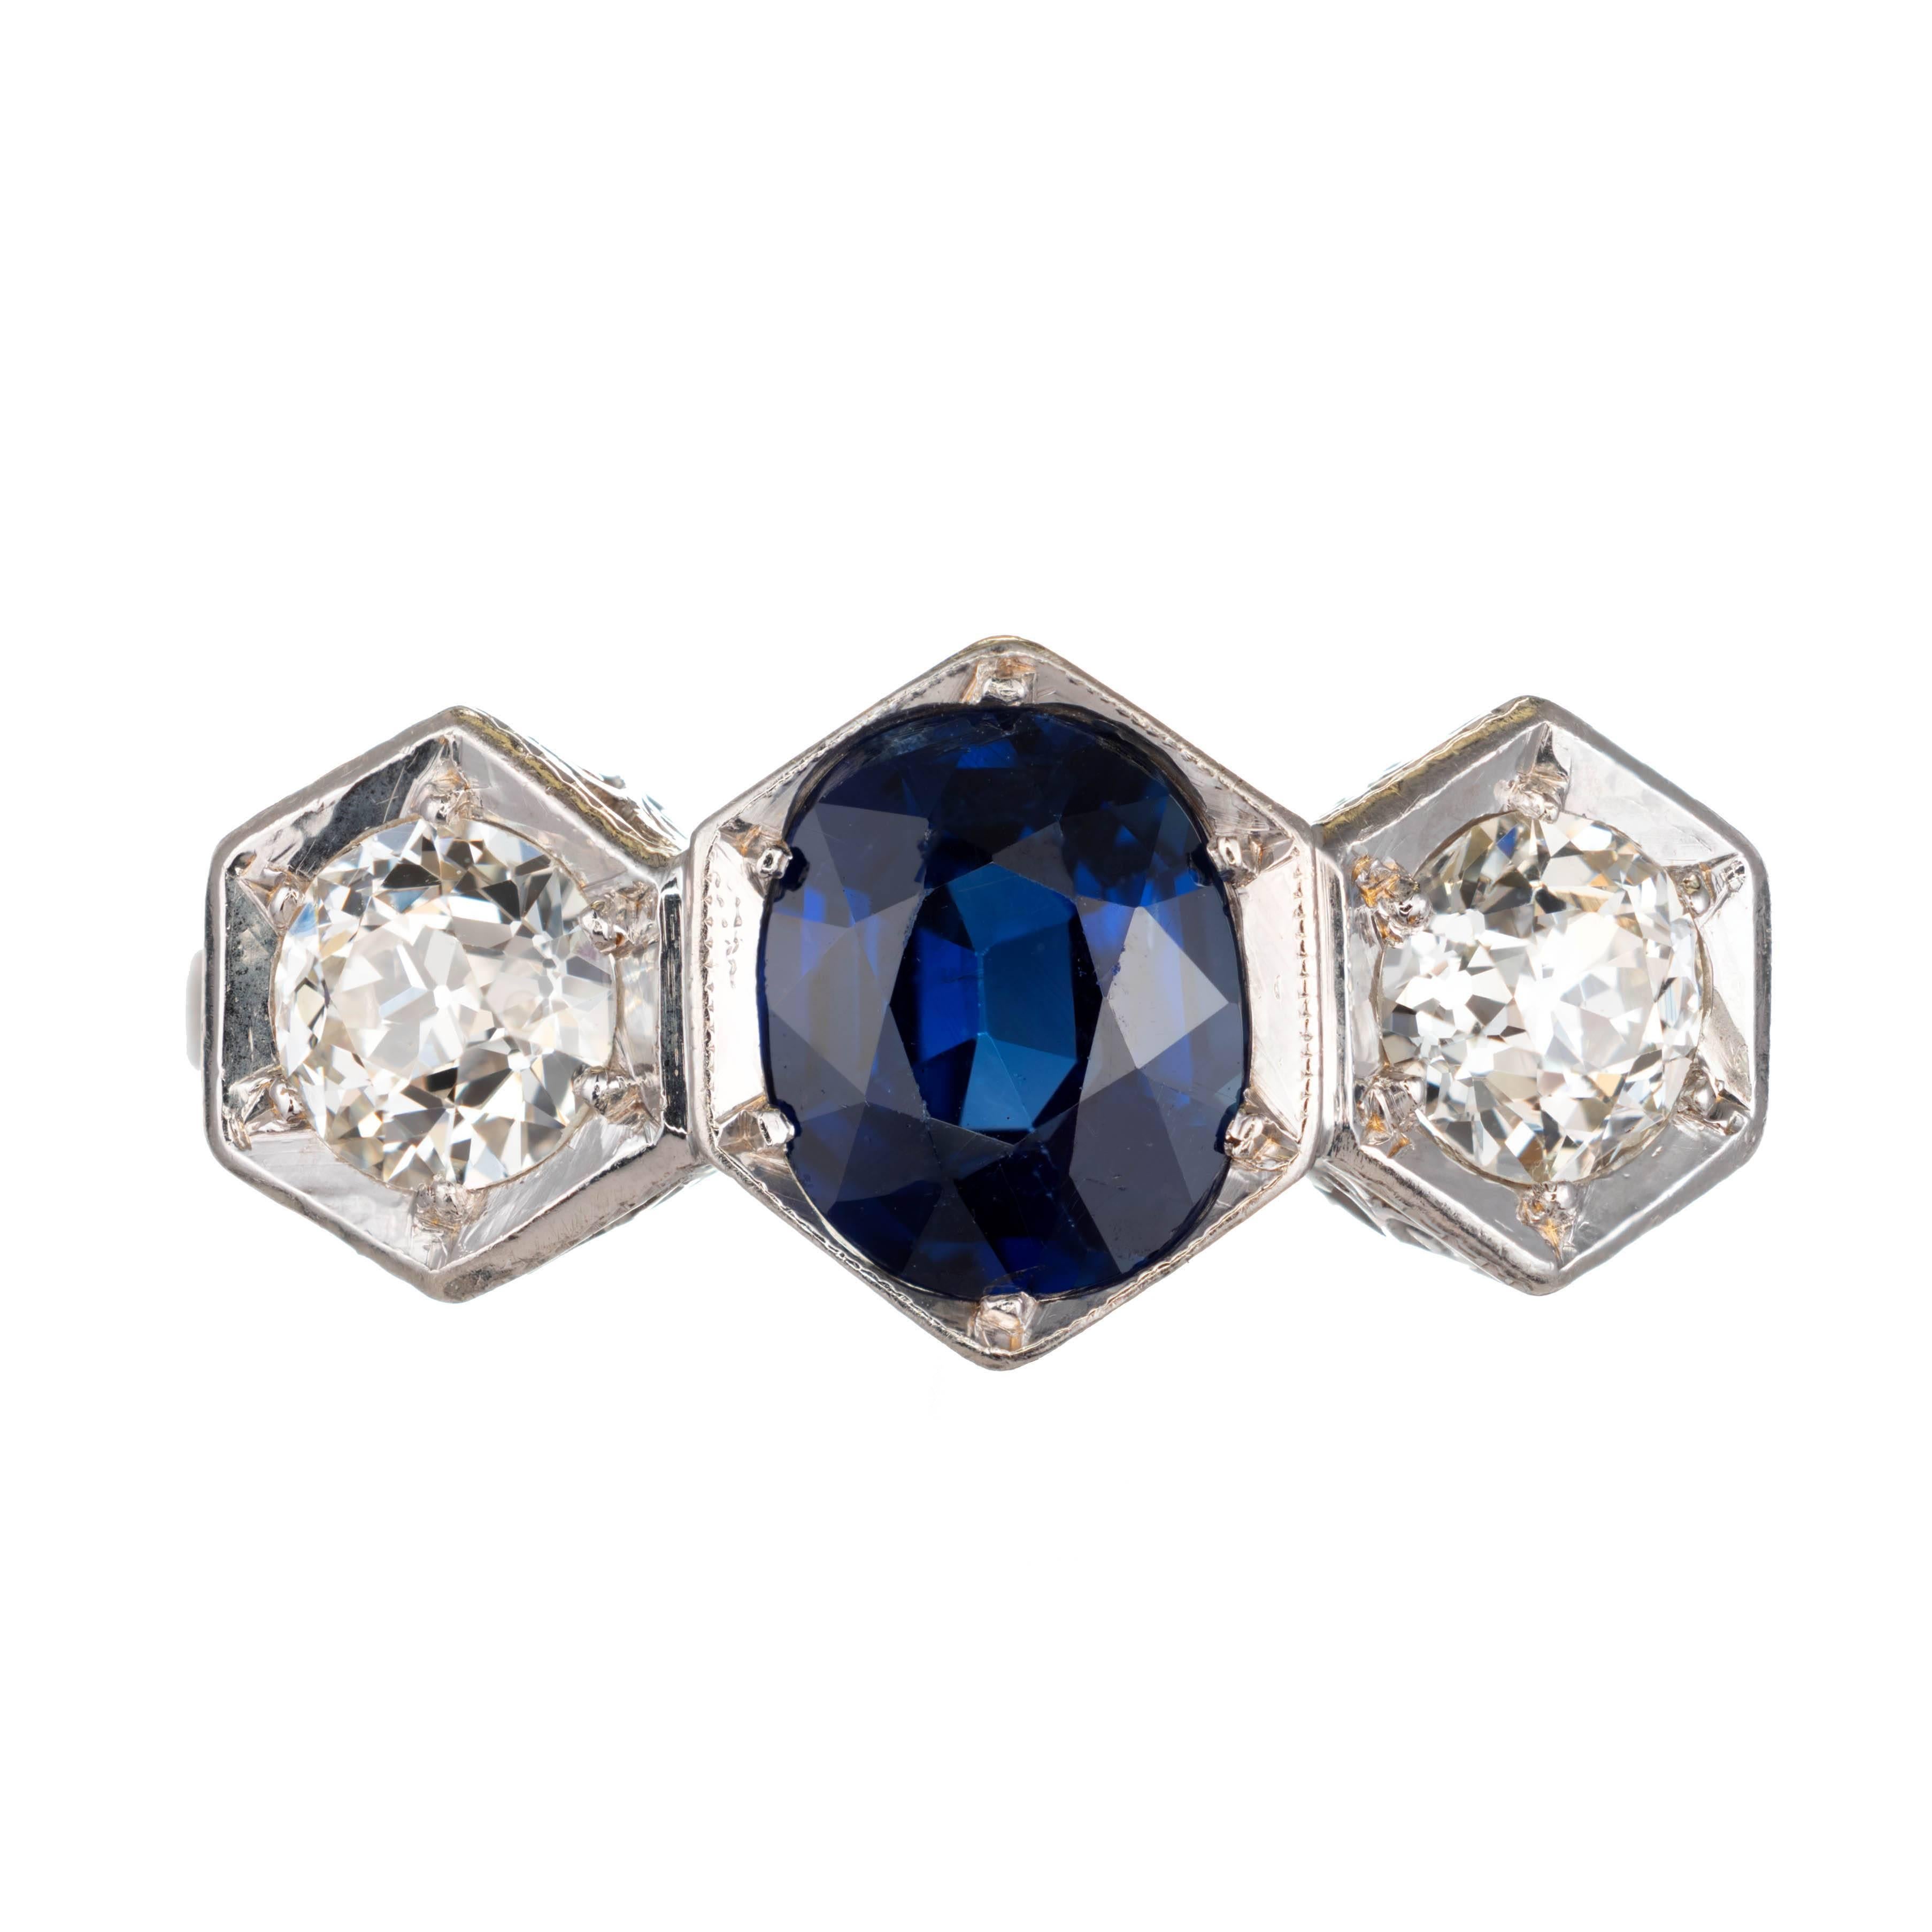 Art Deco Oval sapphire and old euro diamond engagement ring. Three-stone setting in platinum with a center sapphire and two side diamonds. open flower scroll work.  

1 Oval blue sapphire no heat 7.14 x 5.65 x 3.65 approximate 1.15 carat GIA